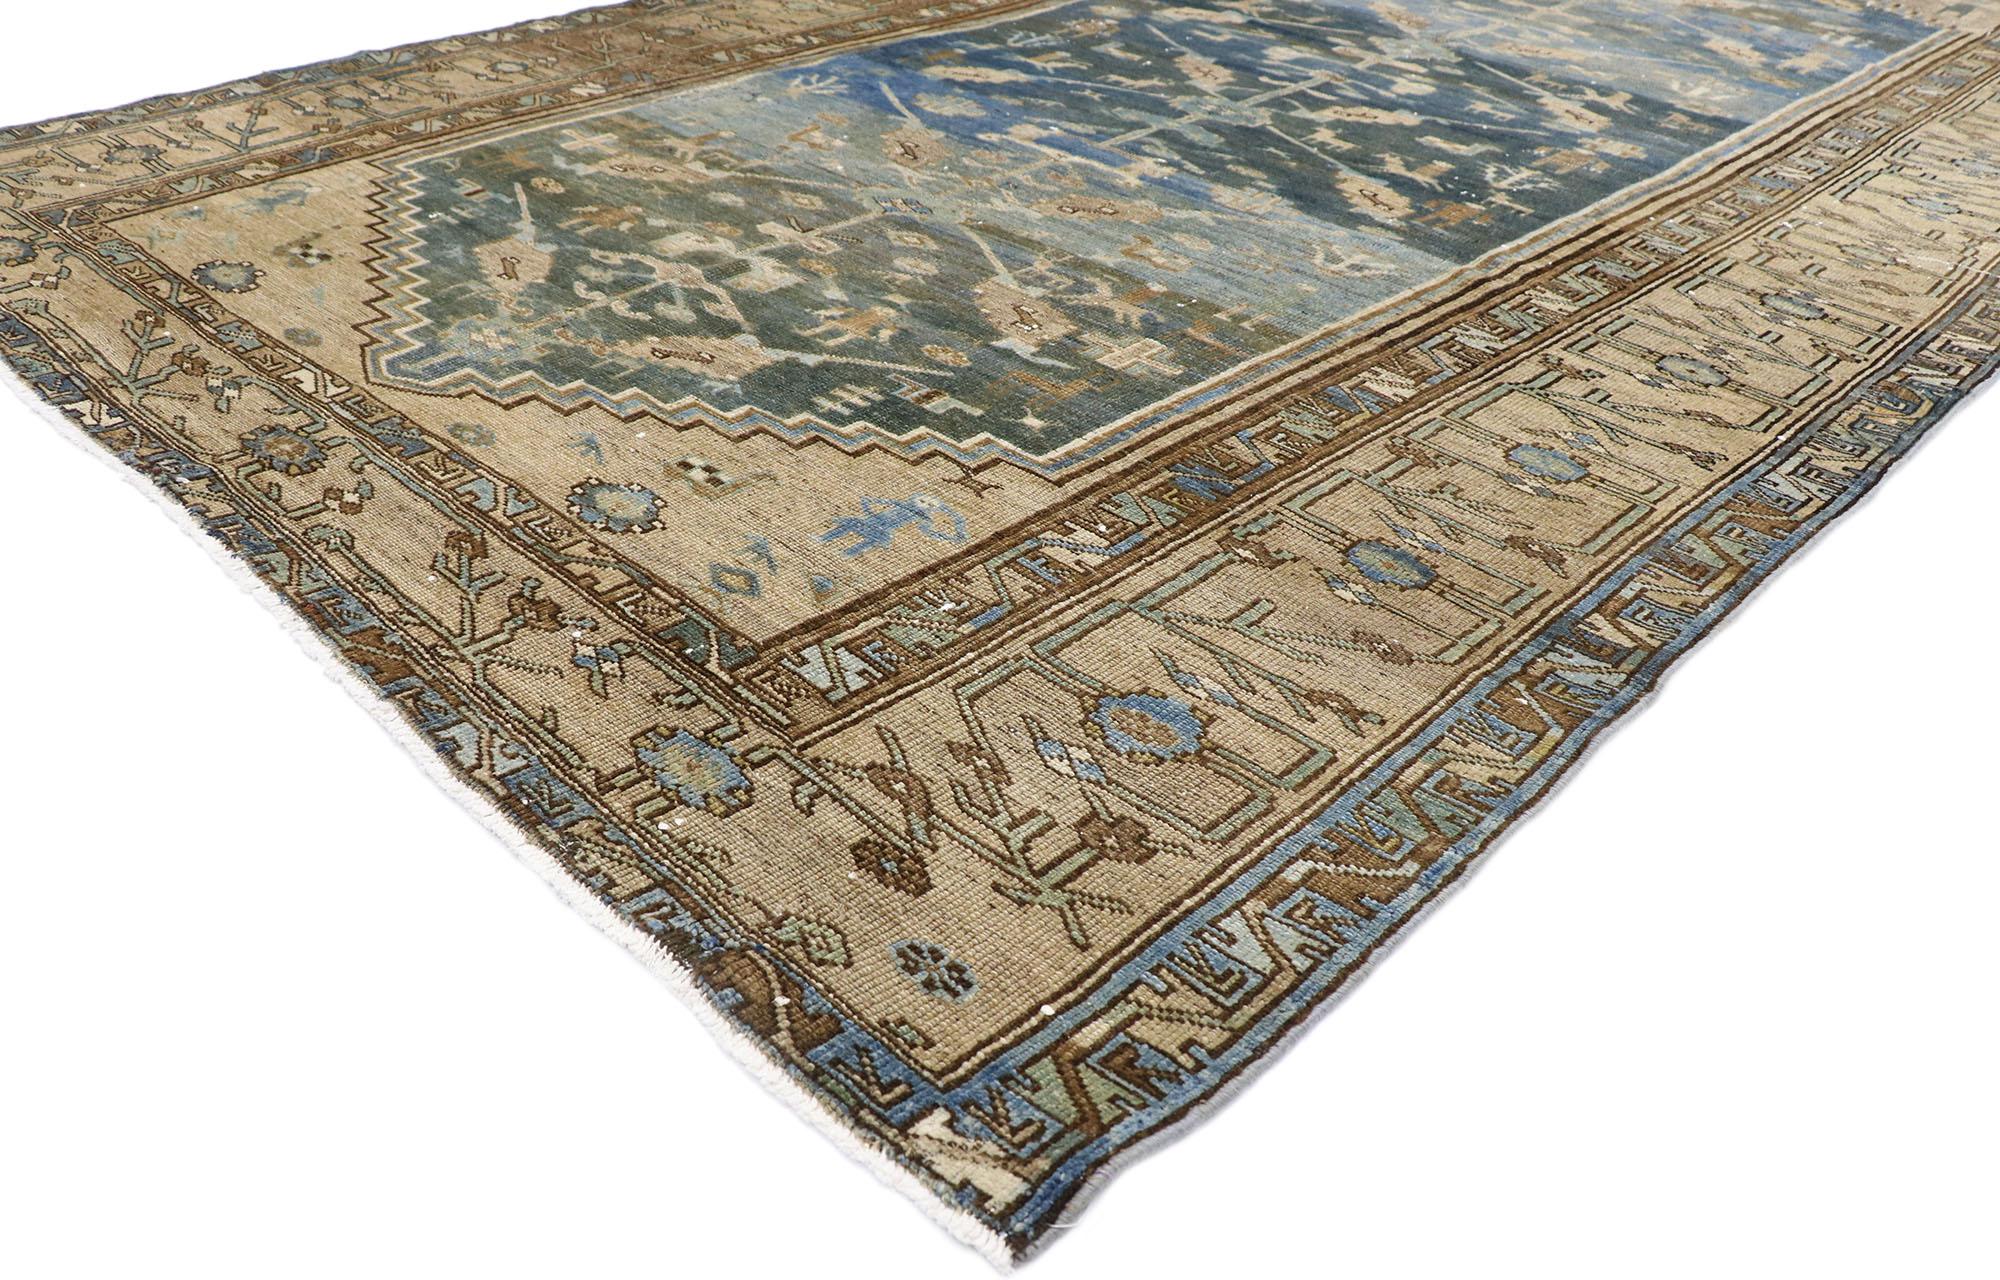 60885 antique Persian Malayer Gallery rug with Greek Mediterranean style. Cleverly composed and poised to impress with its rustic sensibility, this hand knotted wool distressed antique Persian Malayer runner will take on a curated lived-in look that